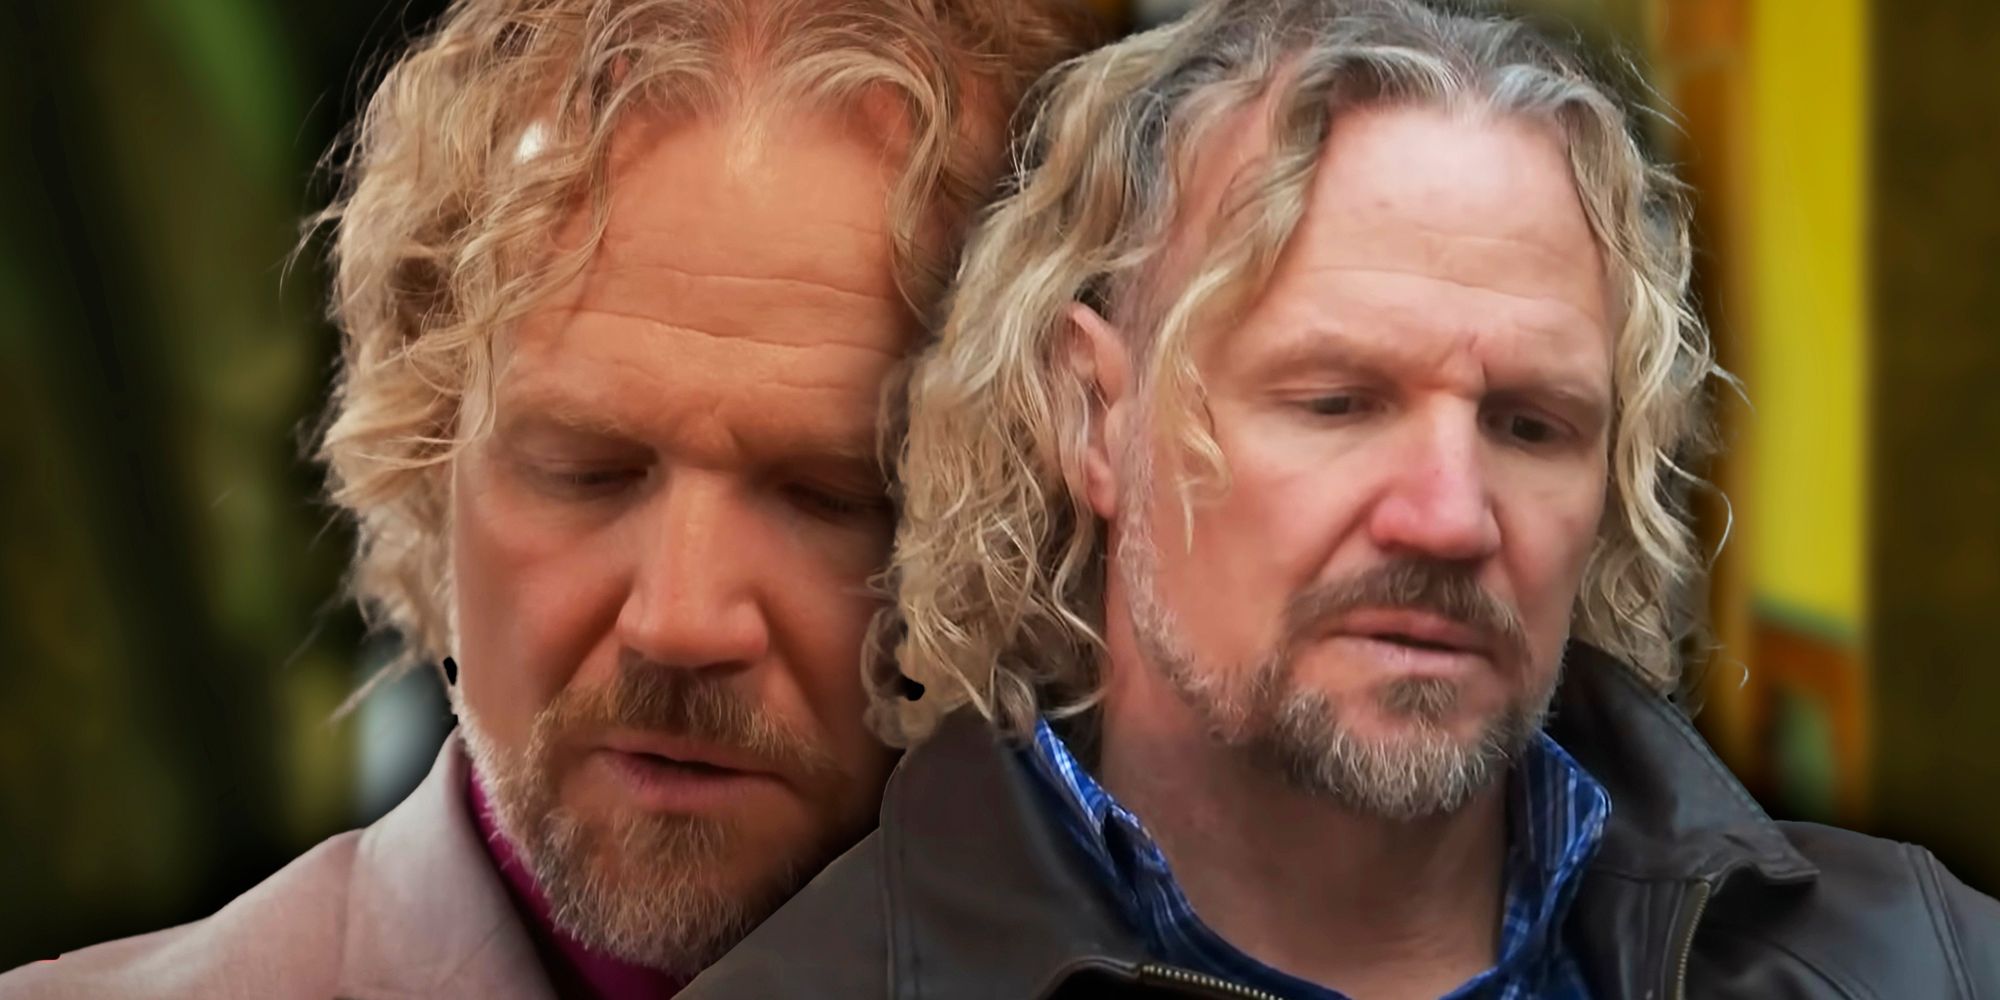 Side by side images of Sister Wives star Kody Brown with two serious expressions